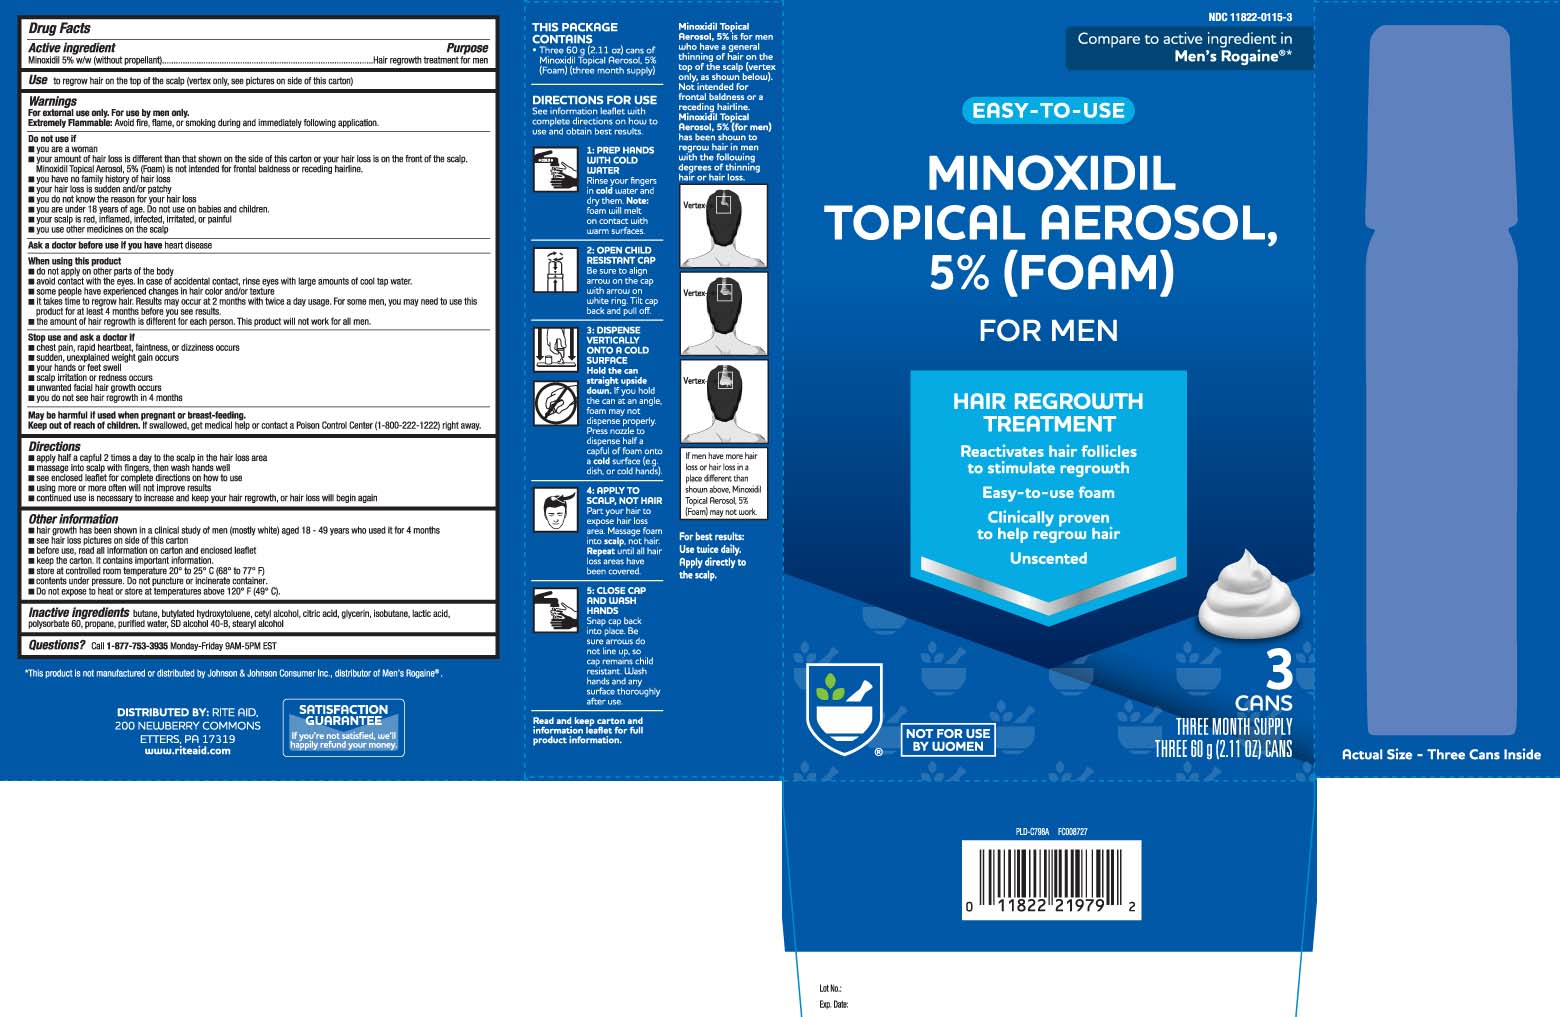 Minoxidil Topical Solution for Men